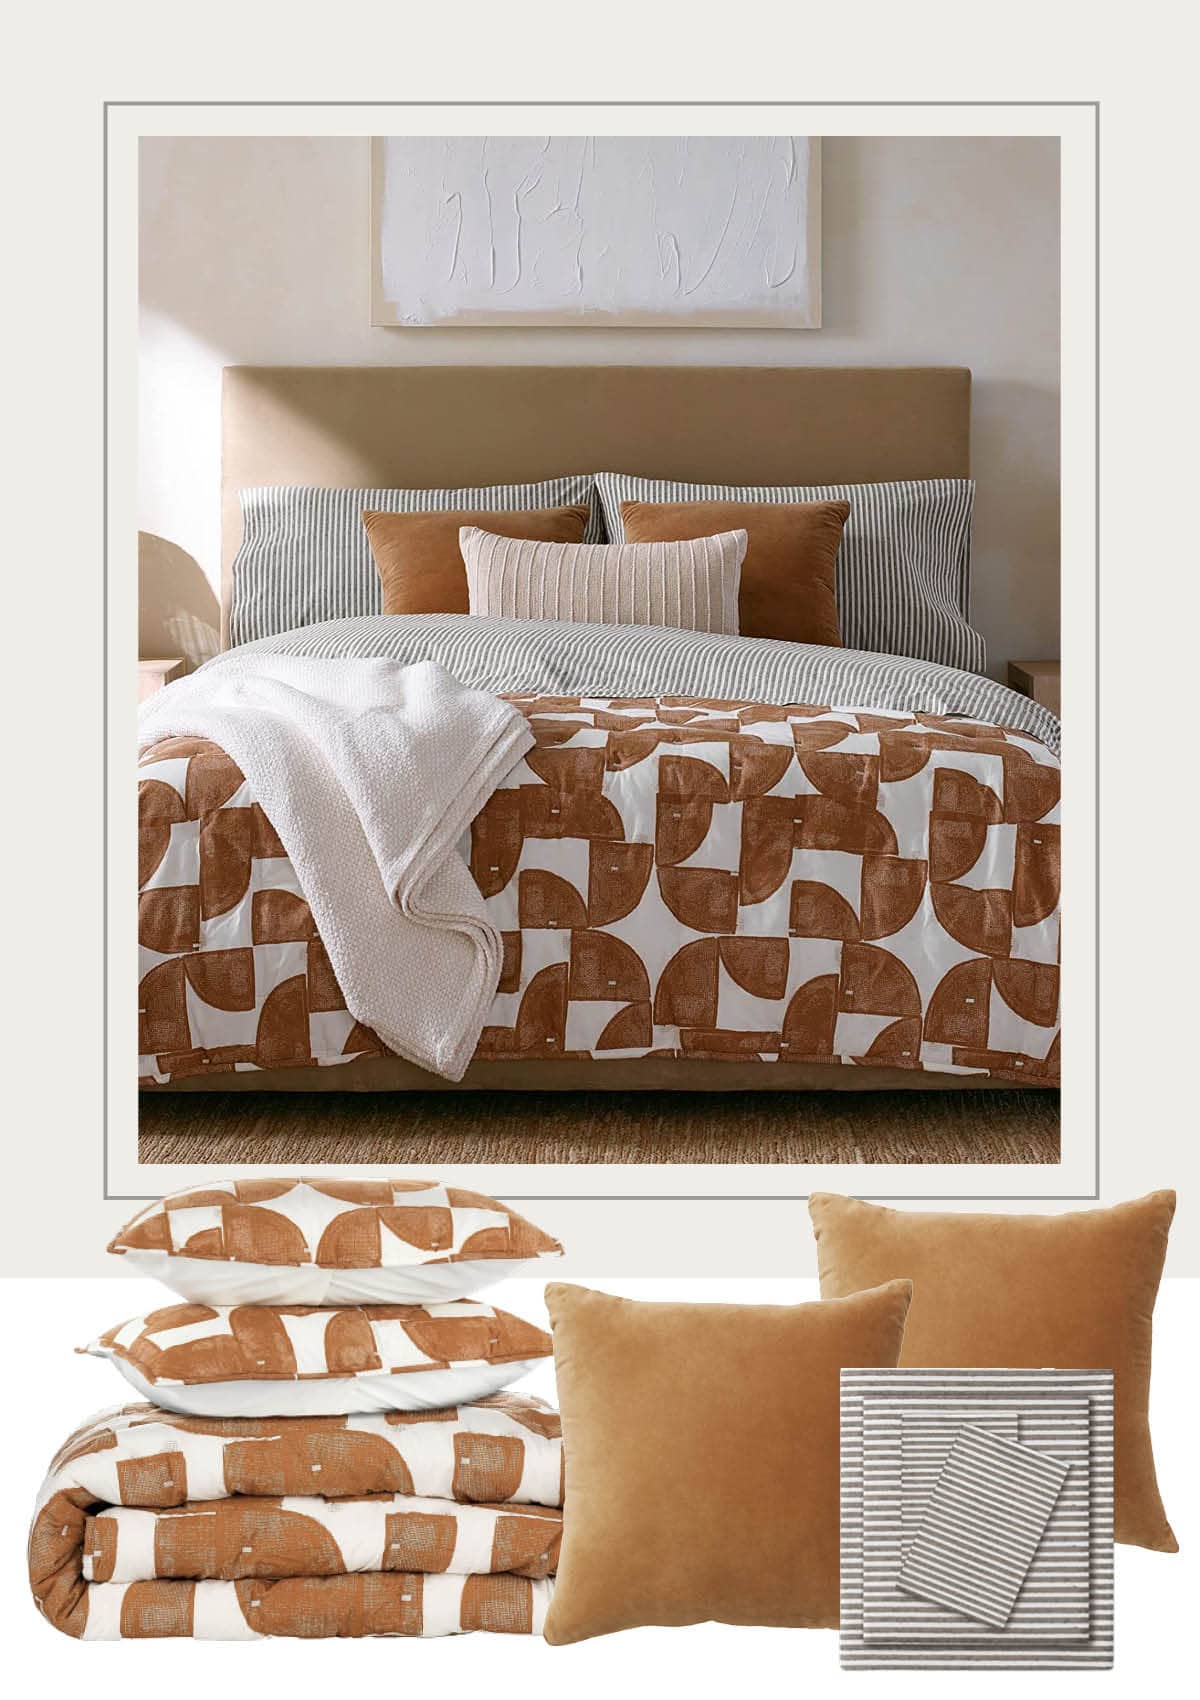 Nate Berkus Home Decor Bedroom Collection On Amazon - bold graphic print in a terra cotta rust color paired with gray and white striped sheets